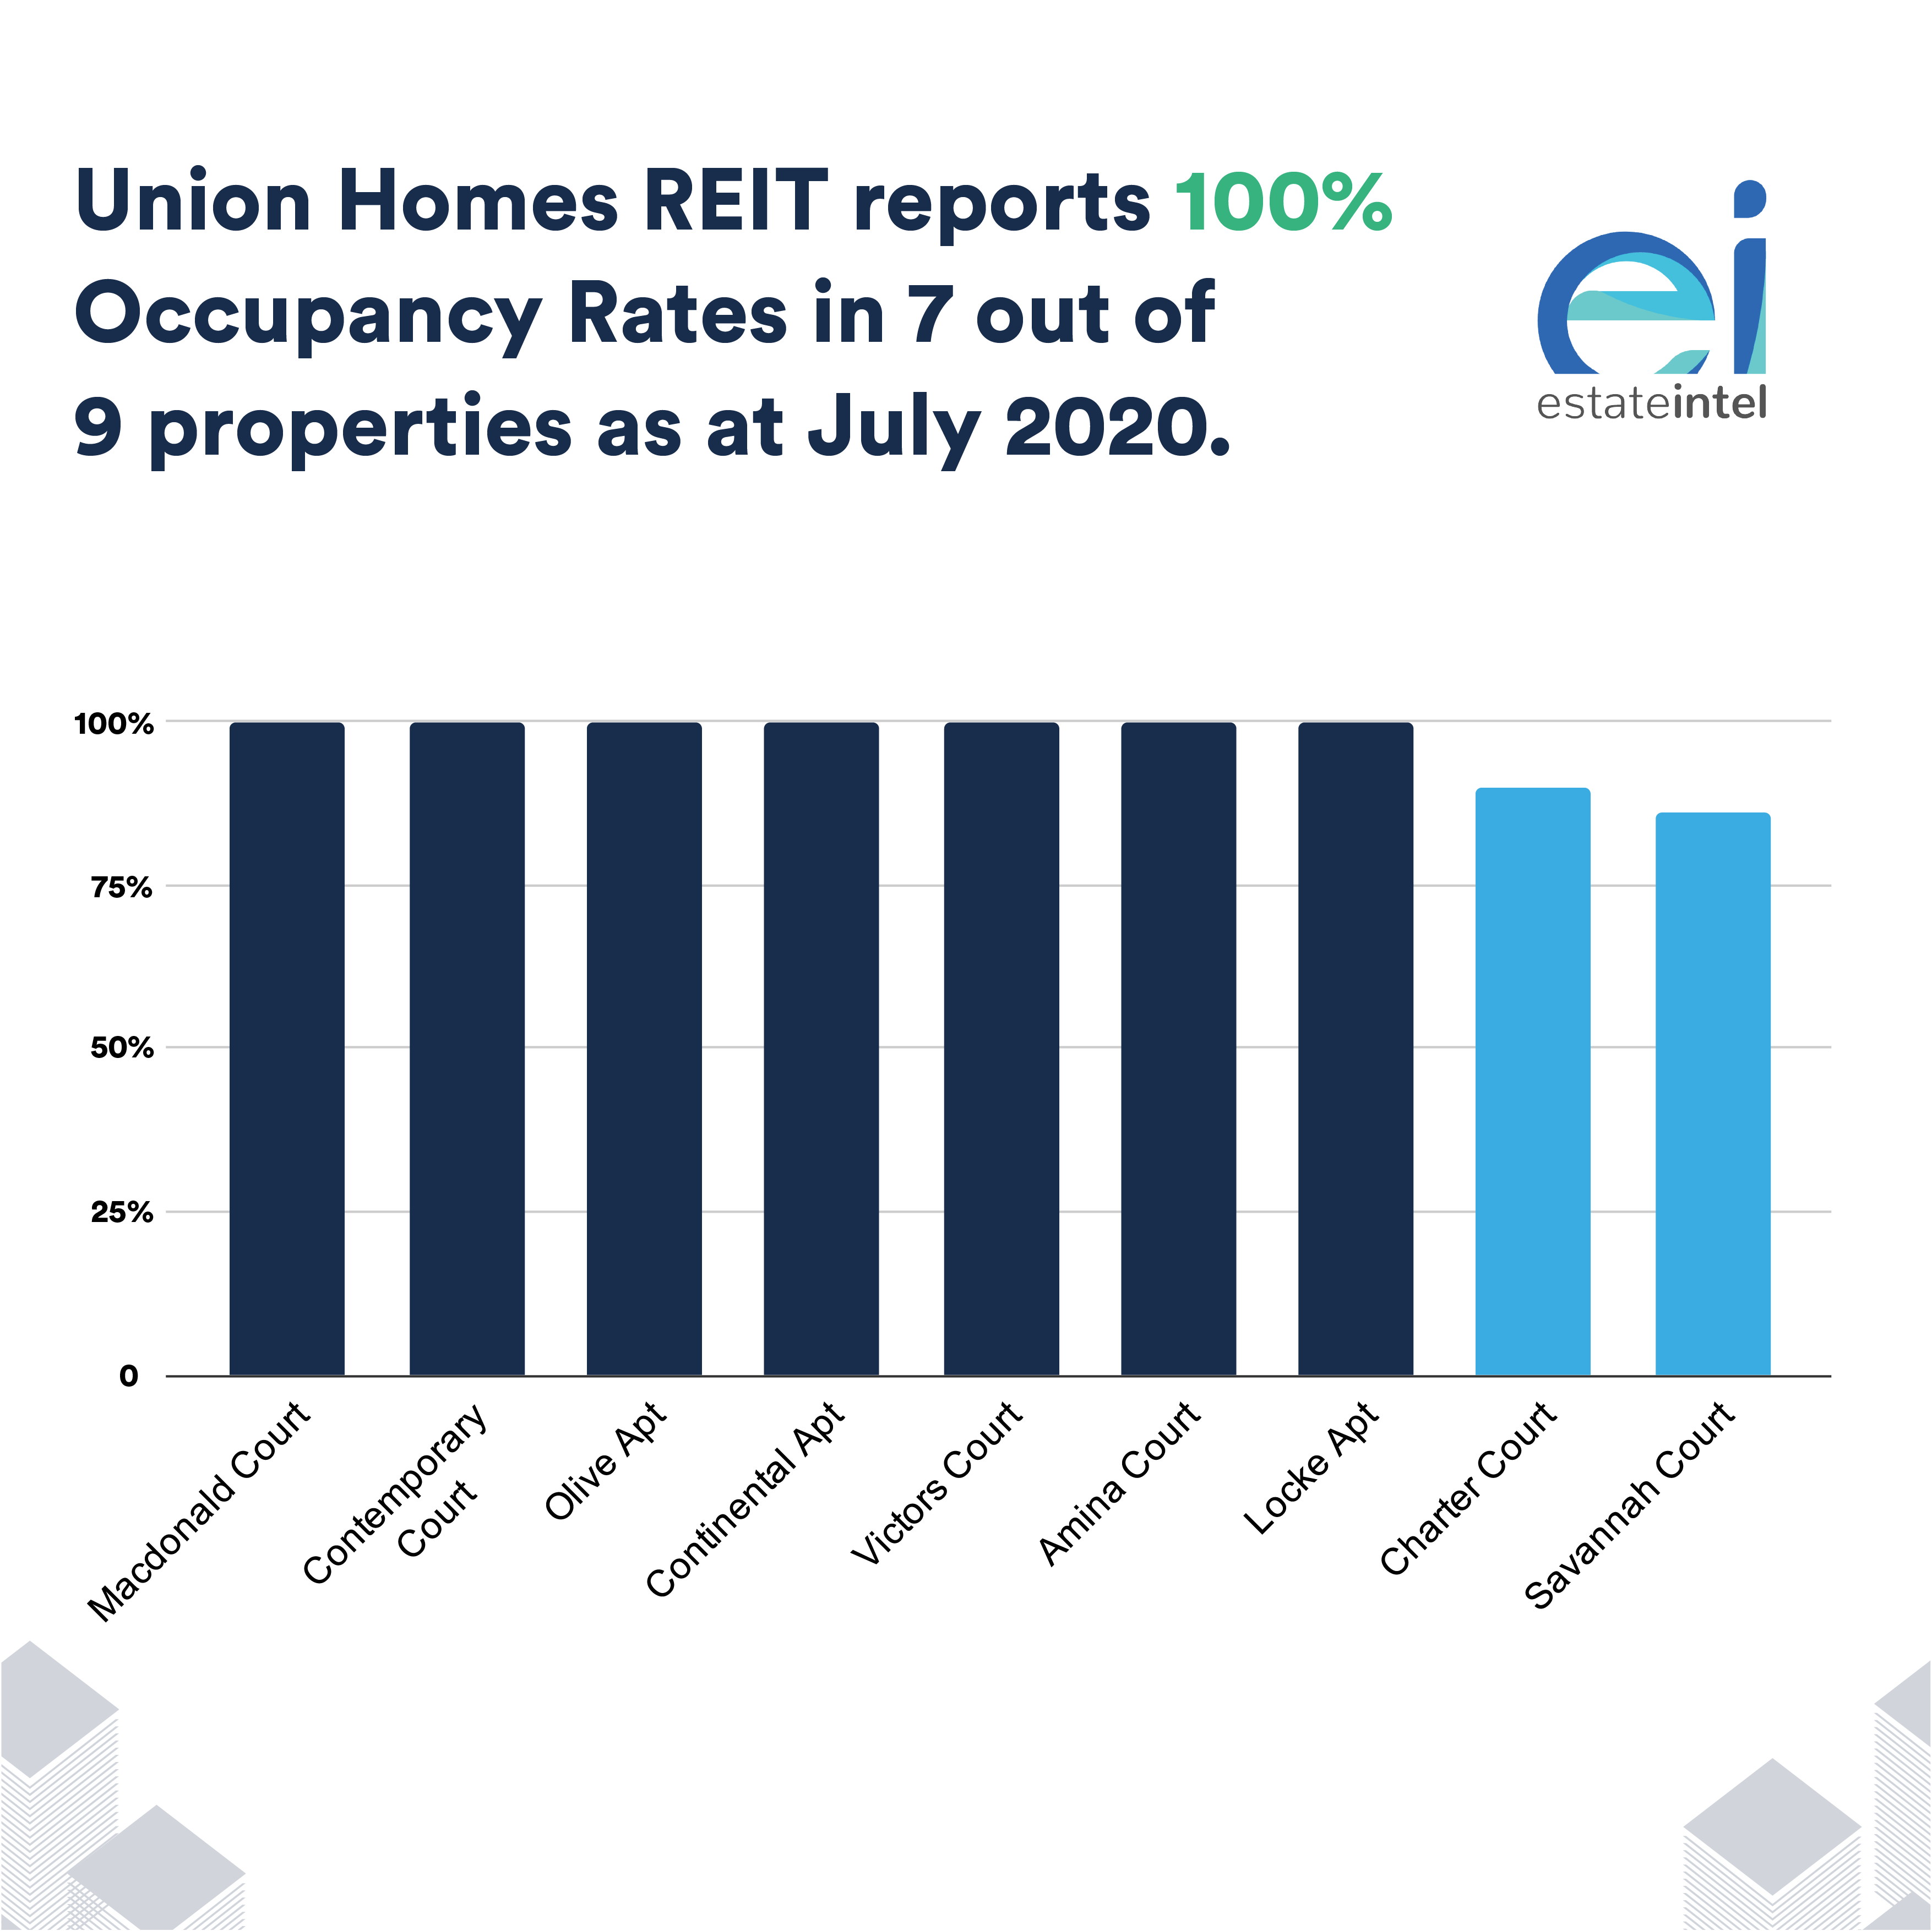 Union Homes REIT reports 100%  Occupancy Rates in 7 out of  9 properties as at July 2020.